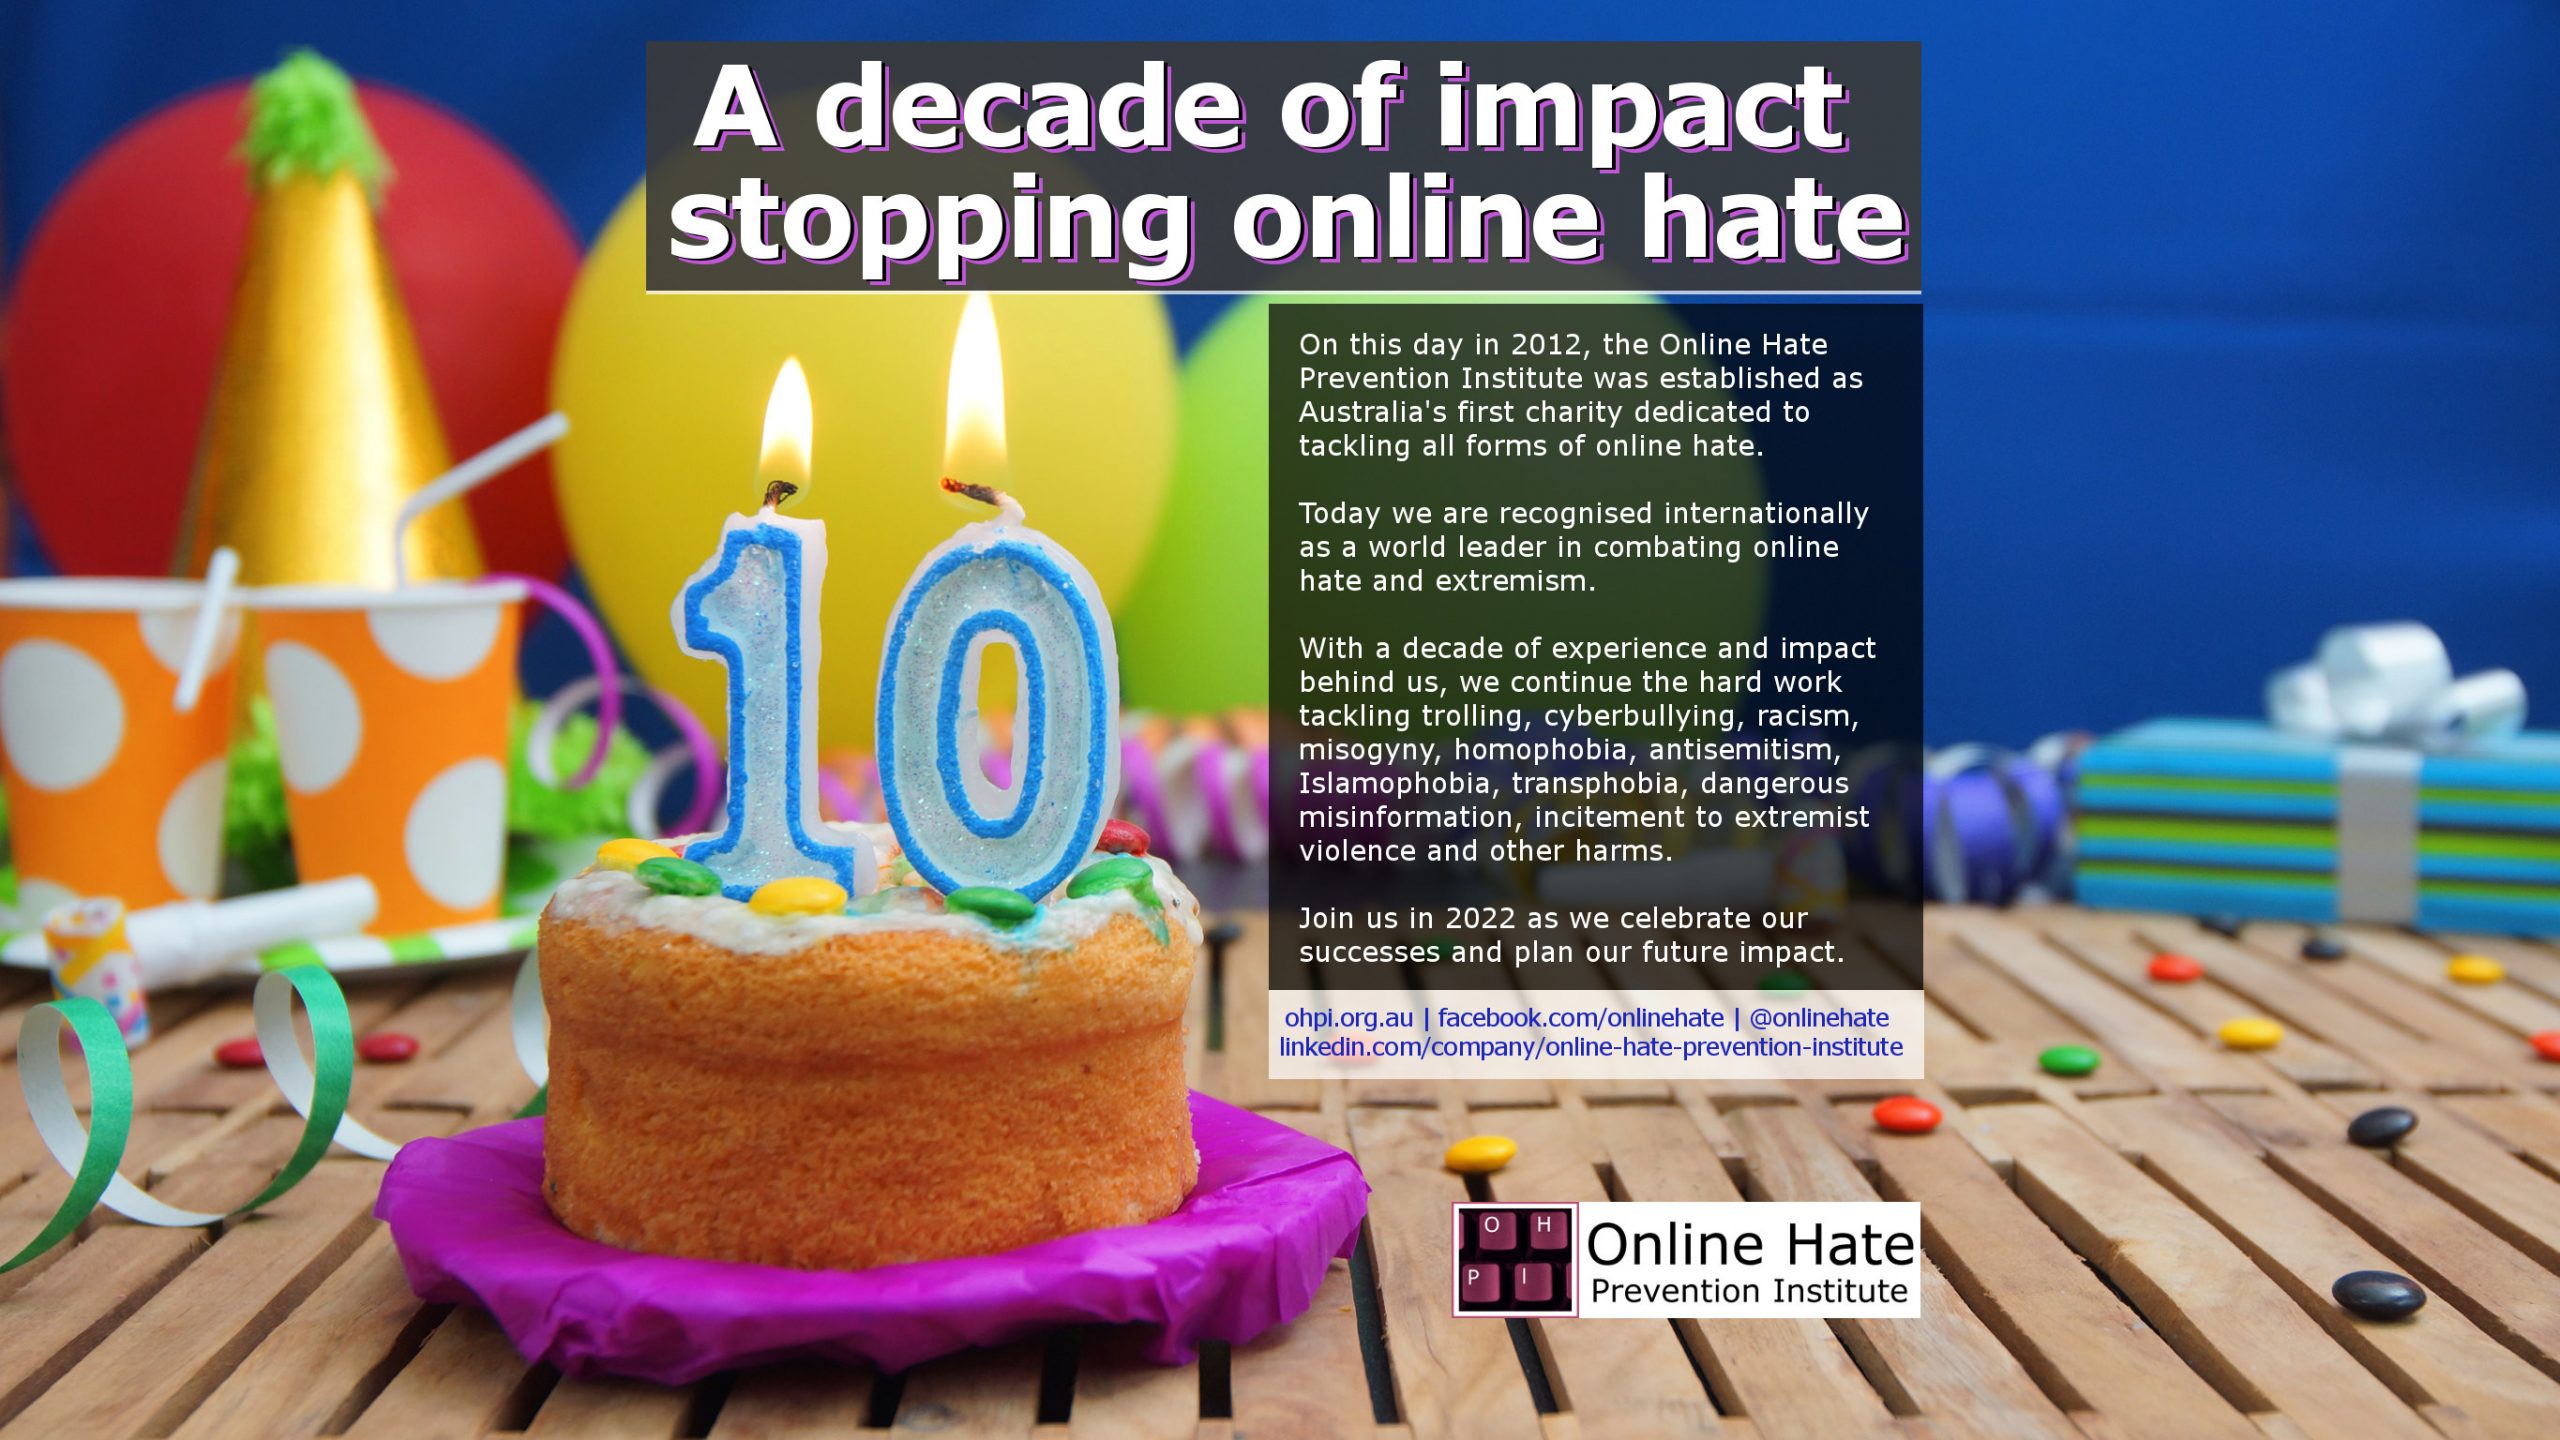 OHPI celebrates 10 years of impact against trolling, cyberbullying, online hate, and extremism